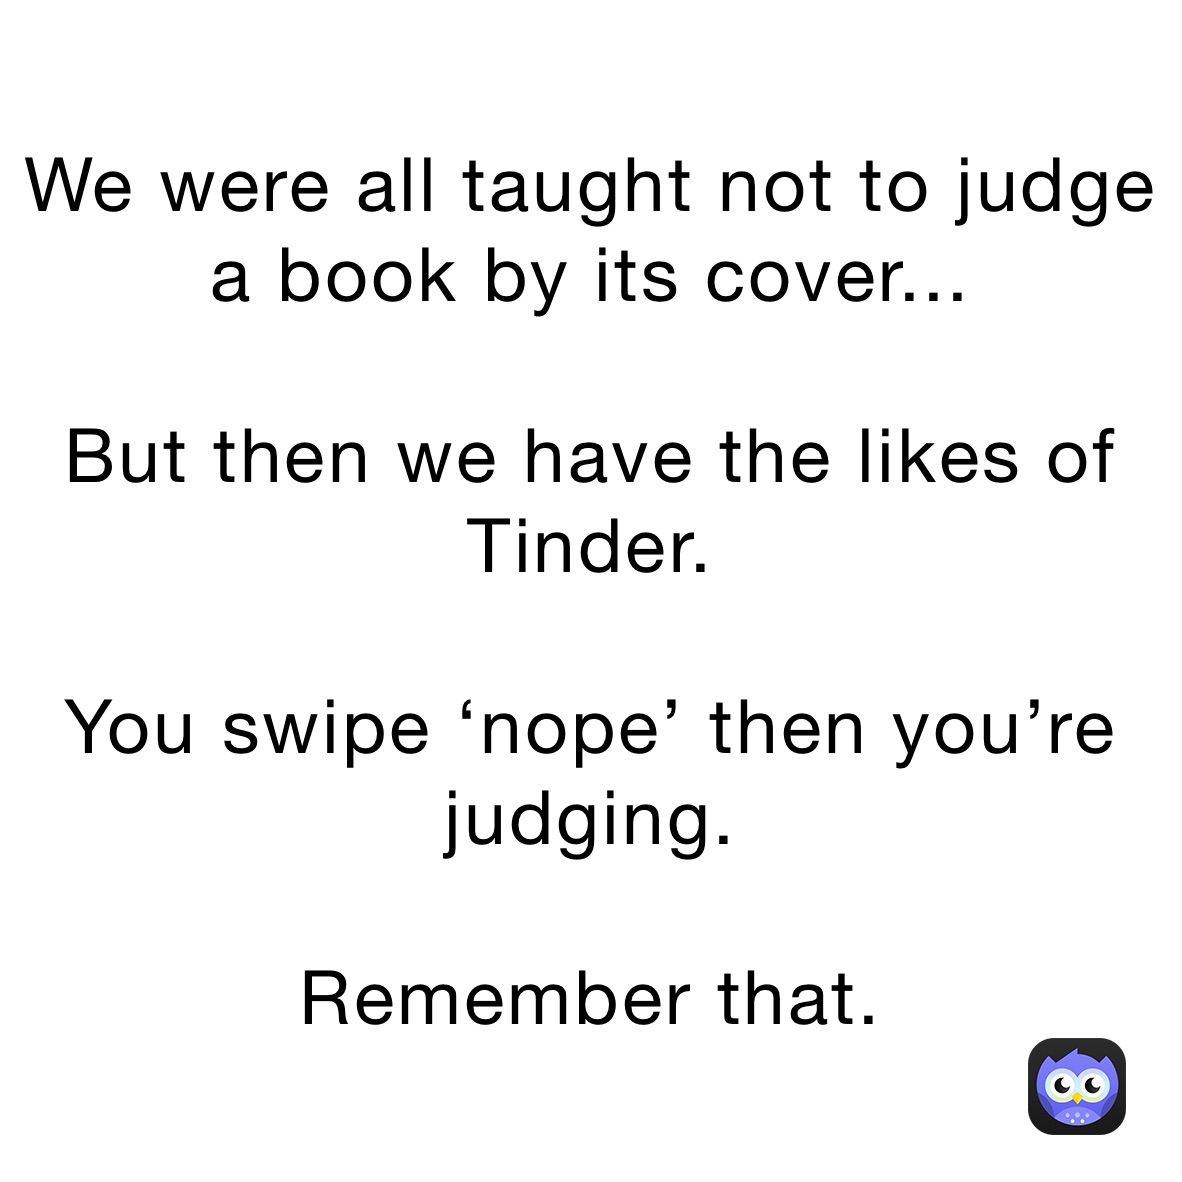 We were all taught not to judge a book by its cover... 

But then we have the likes of Tinder.

You swipe ‘nope’ then you’re judging. 

Remember that.  we were all told not to judge a book by its cover